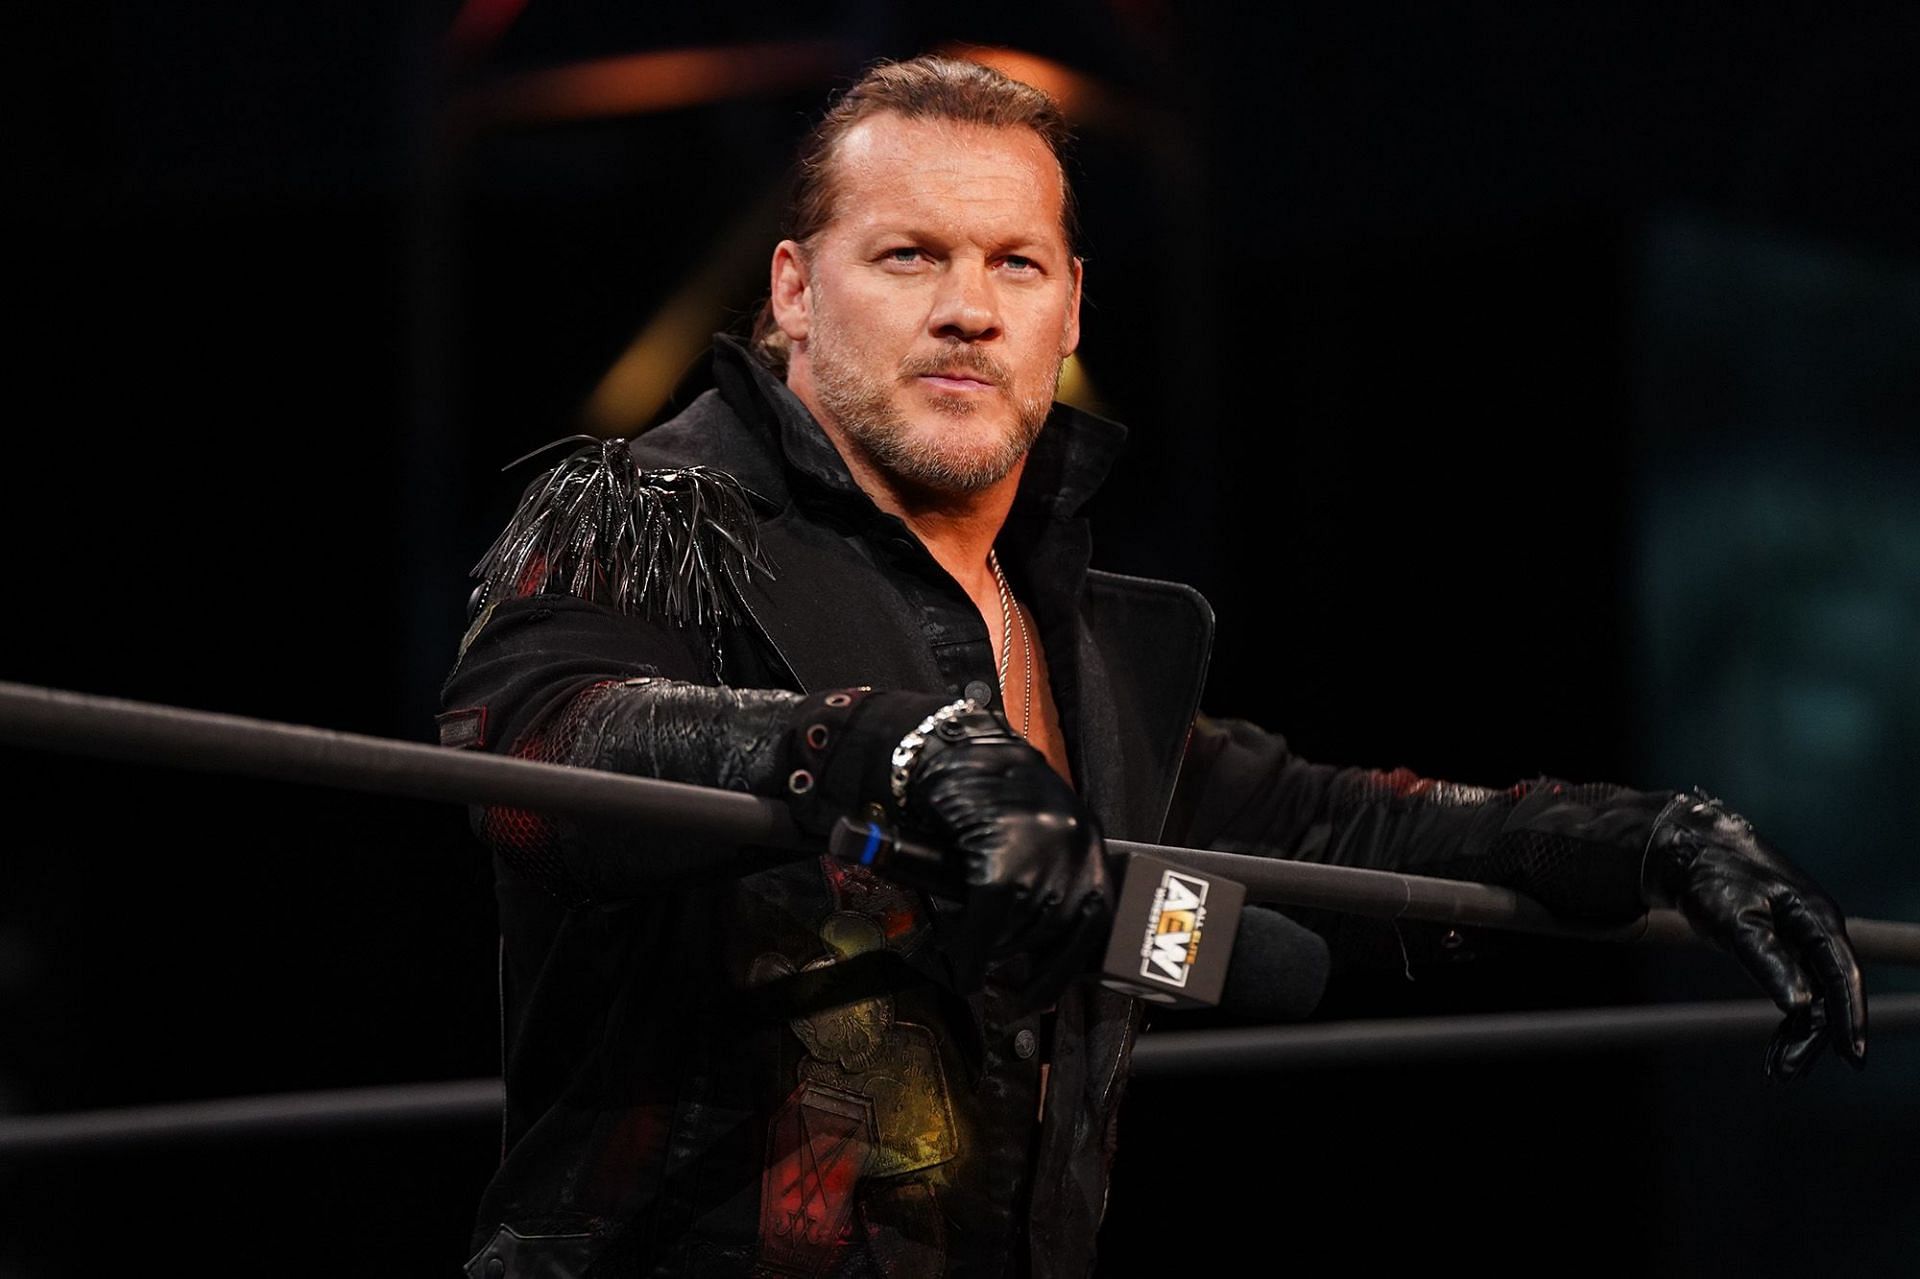 Chris Jericho is one of the biggest heels in All Elite Wrestling today